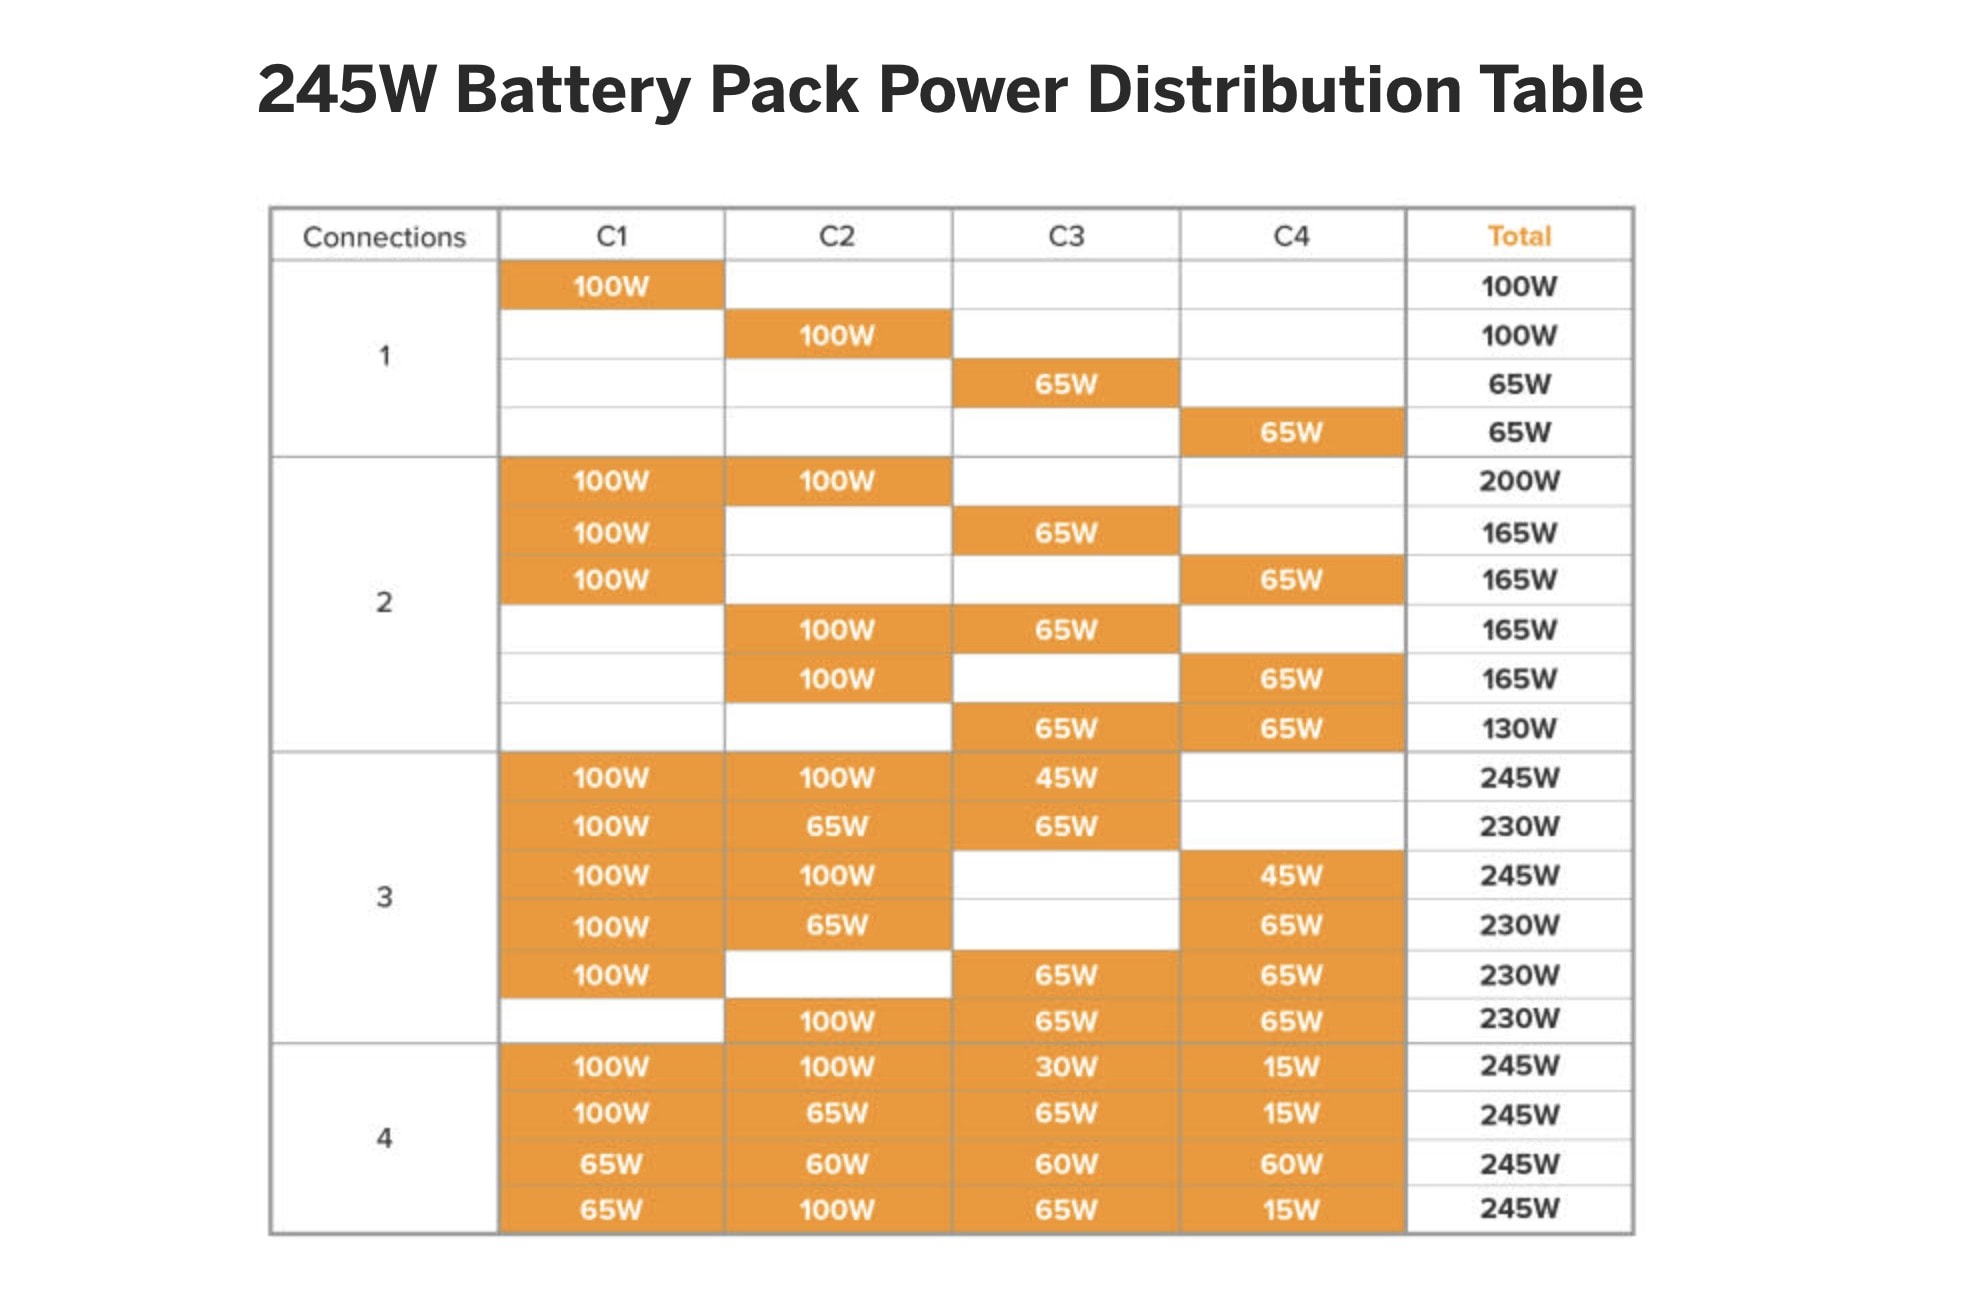 The table shows HyperJuice 245W battery pack charging configurations. 